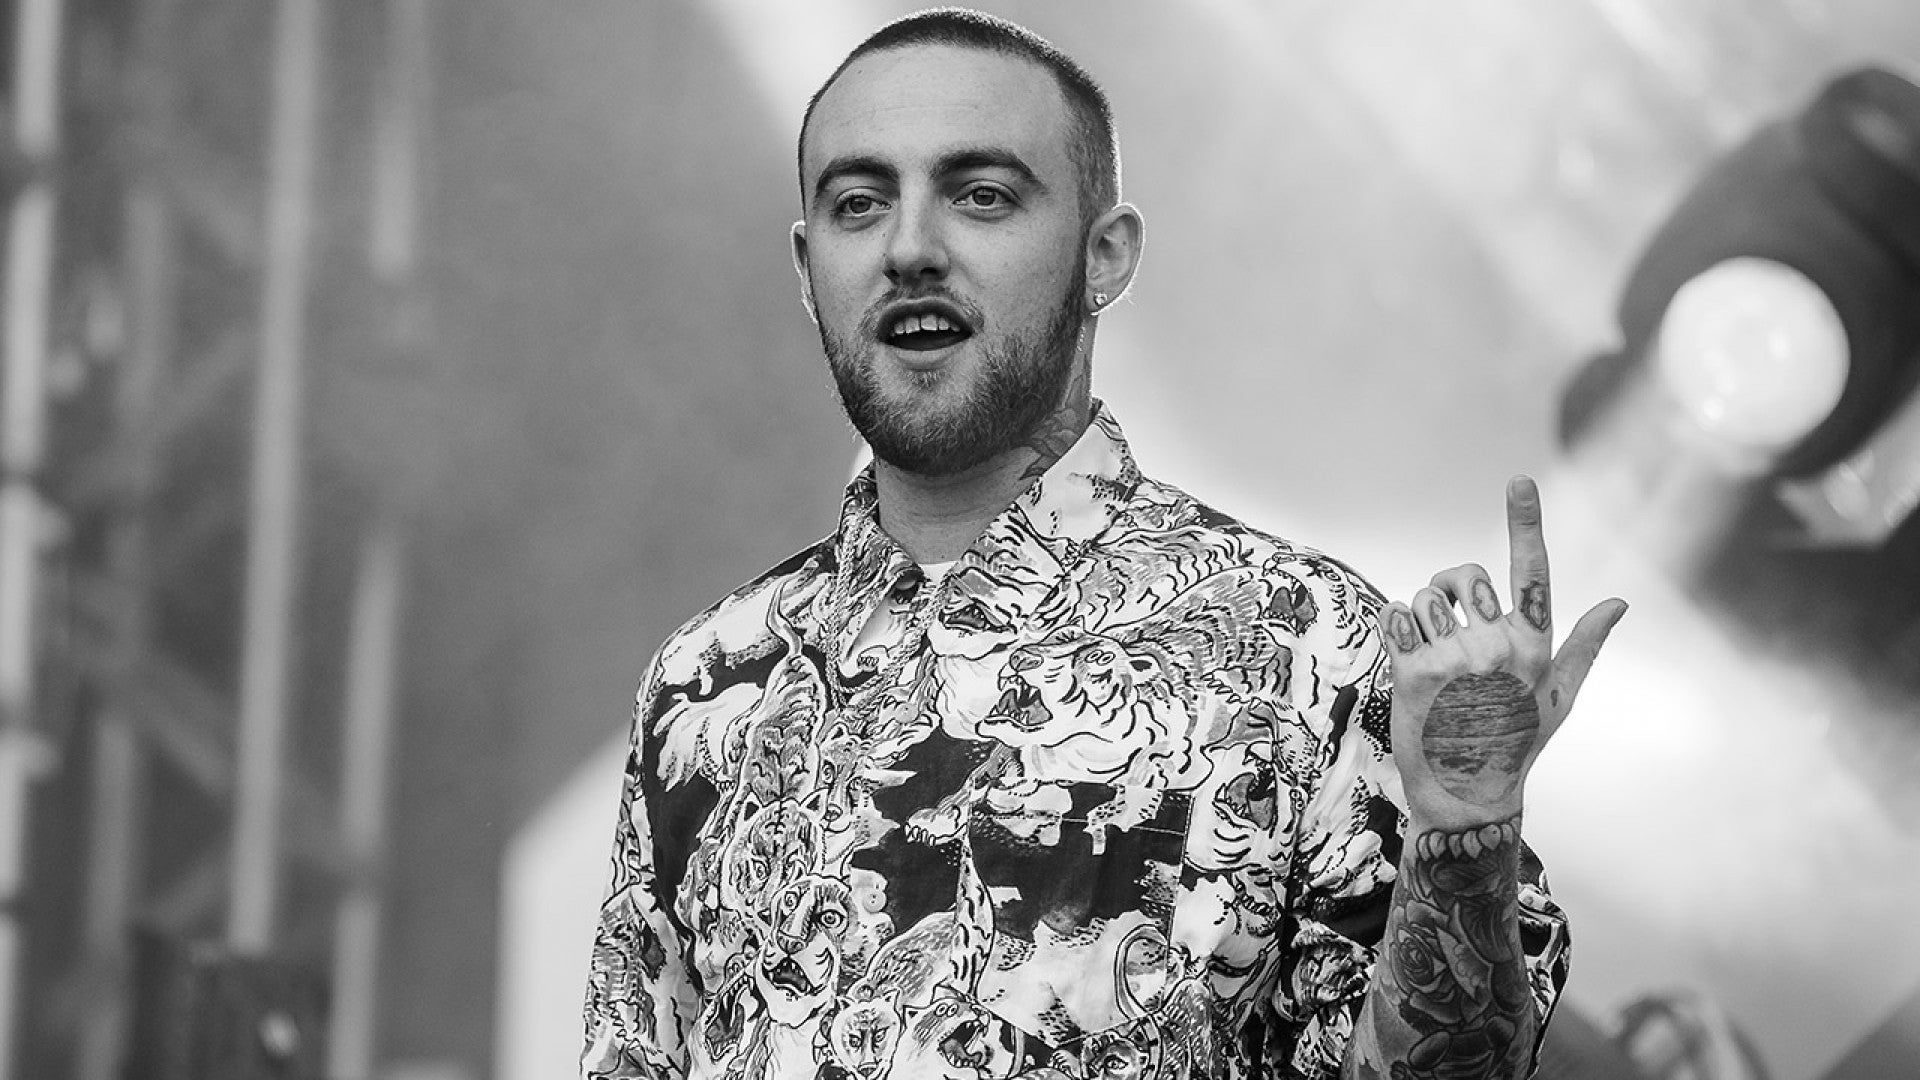 Mac Miller Dead at 26: Chance the Rapper, Questlove and More React